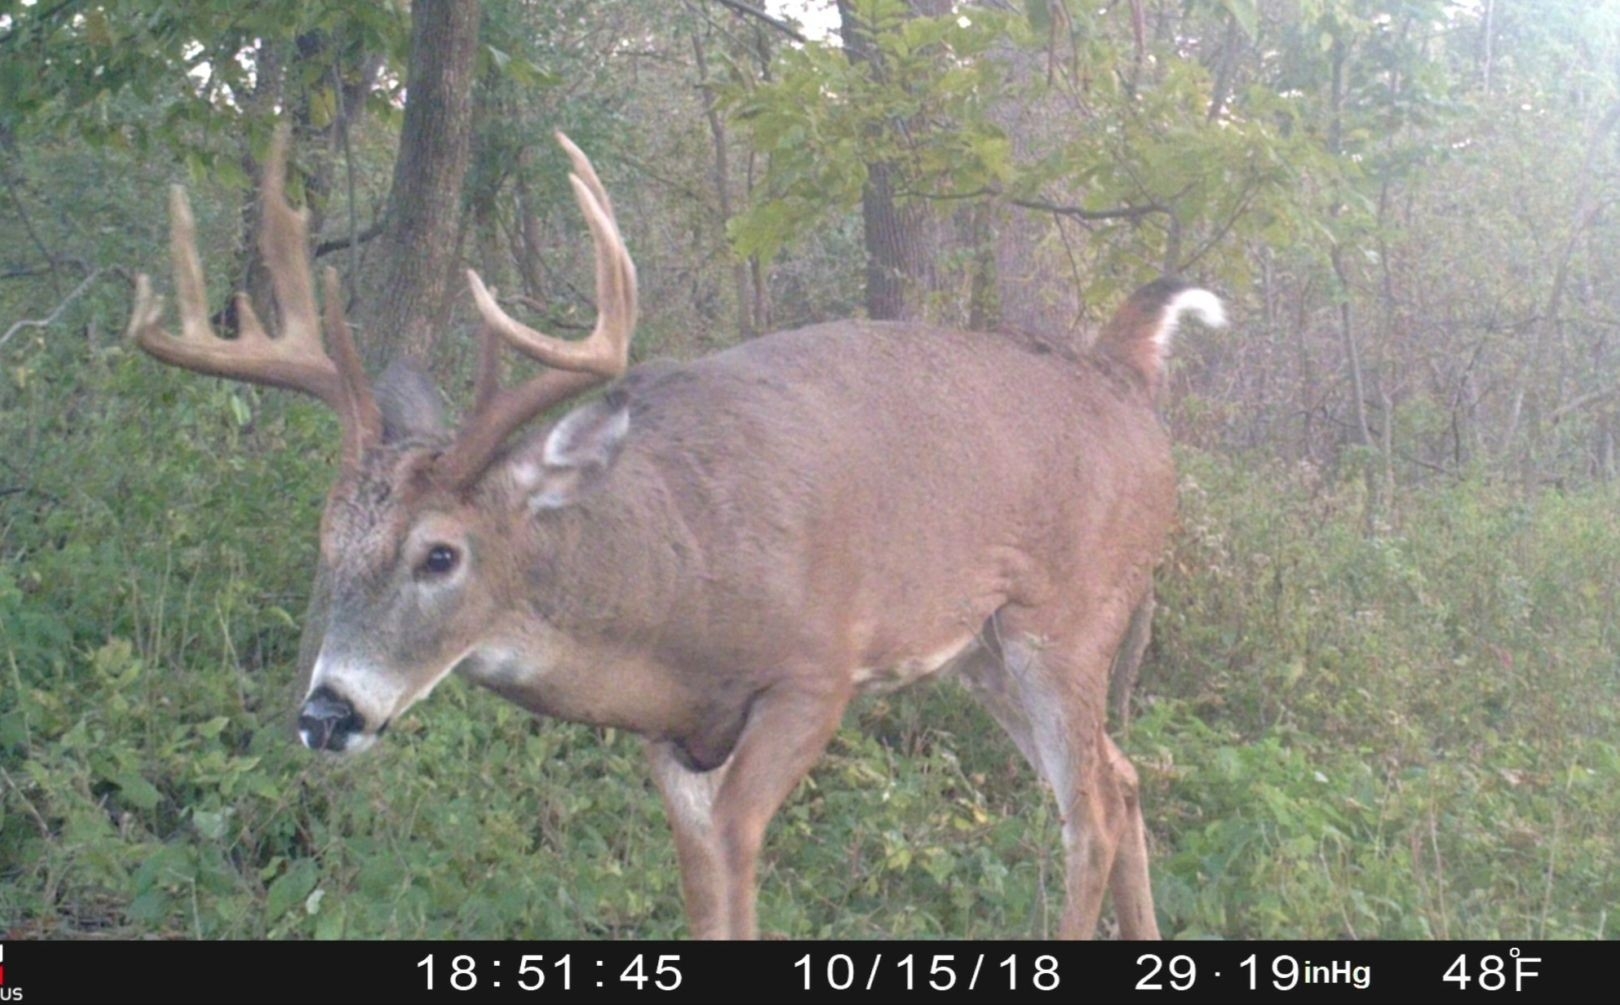 When Will The Whitetail Rut Begin | Whitetail Habitat Solutions-2021 Whitetail Deer Rut Predictions In Ct